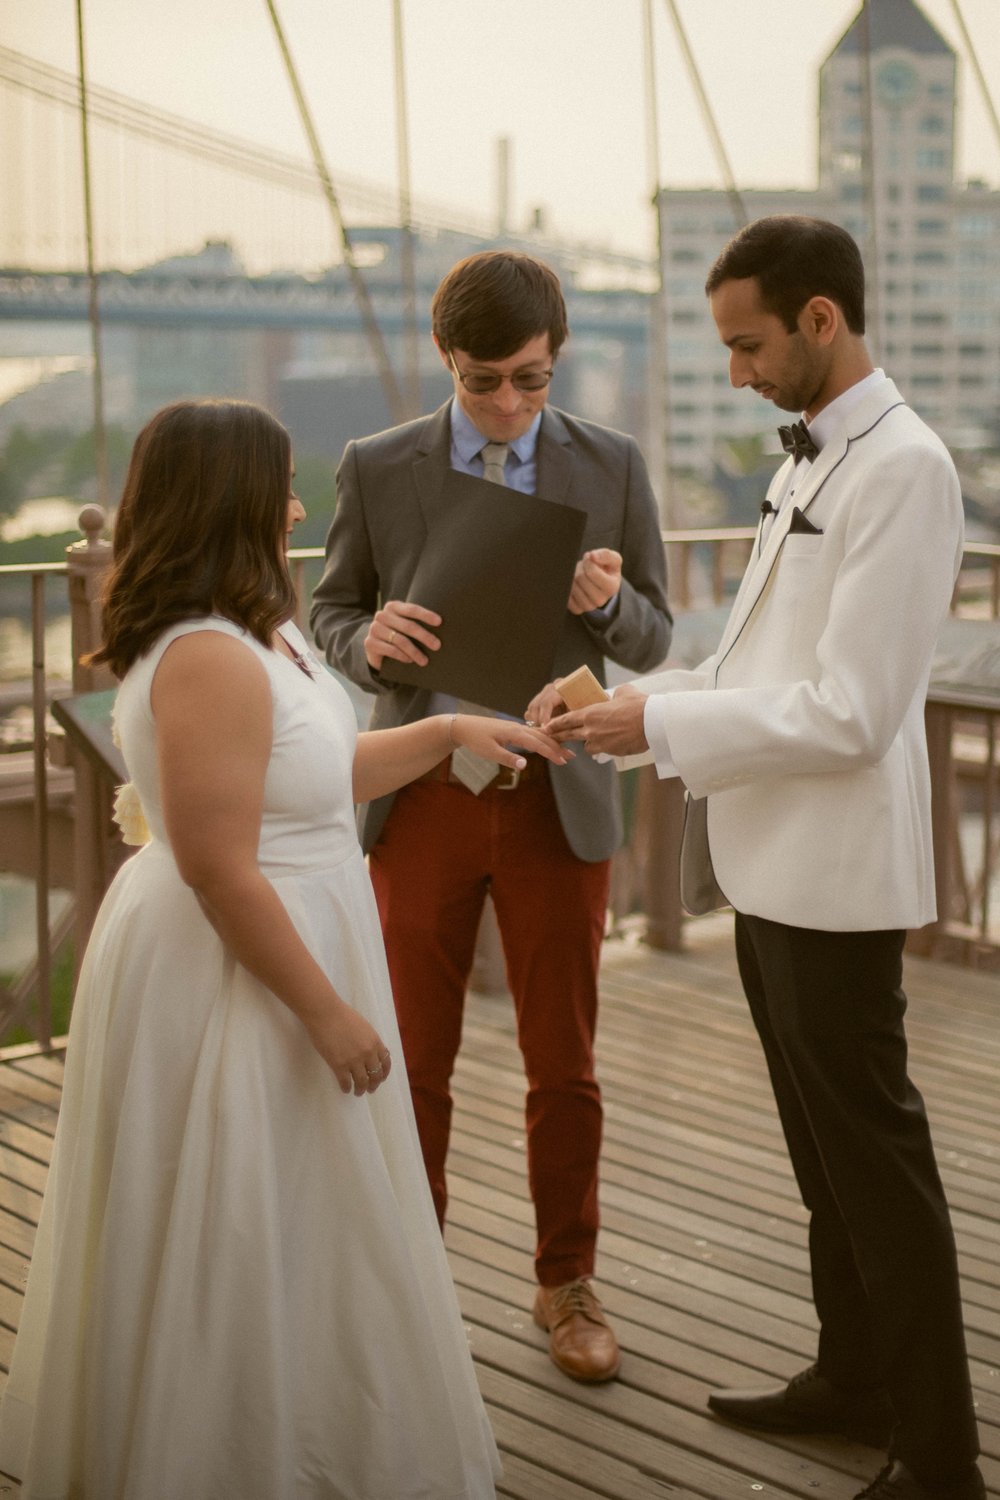 Witness the joy and laughter as Brett, an NYC officiant, officiates a quick ceremony on the BrooklynBridge, followed by celebratory shots of 7am whiskey